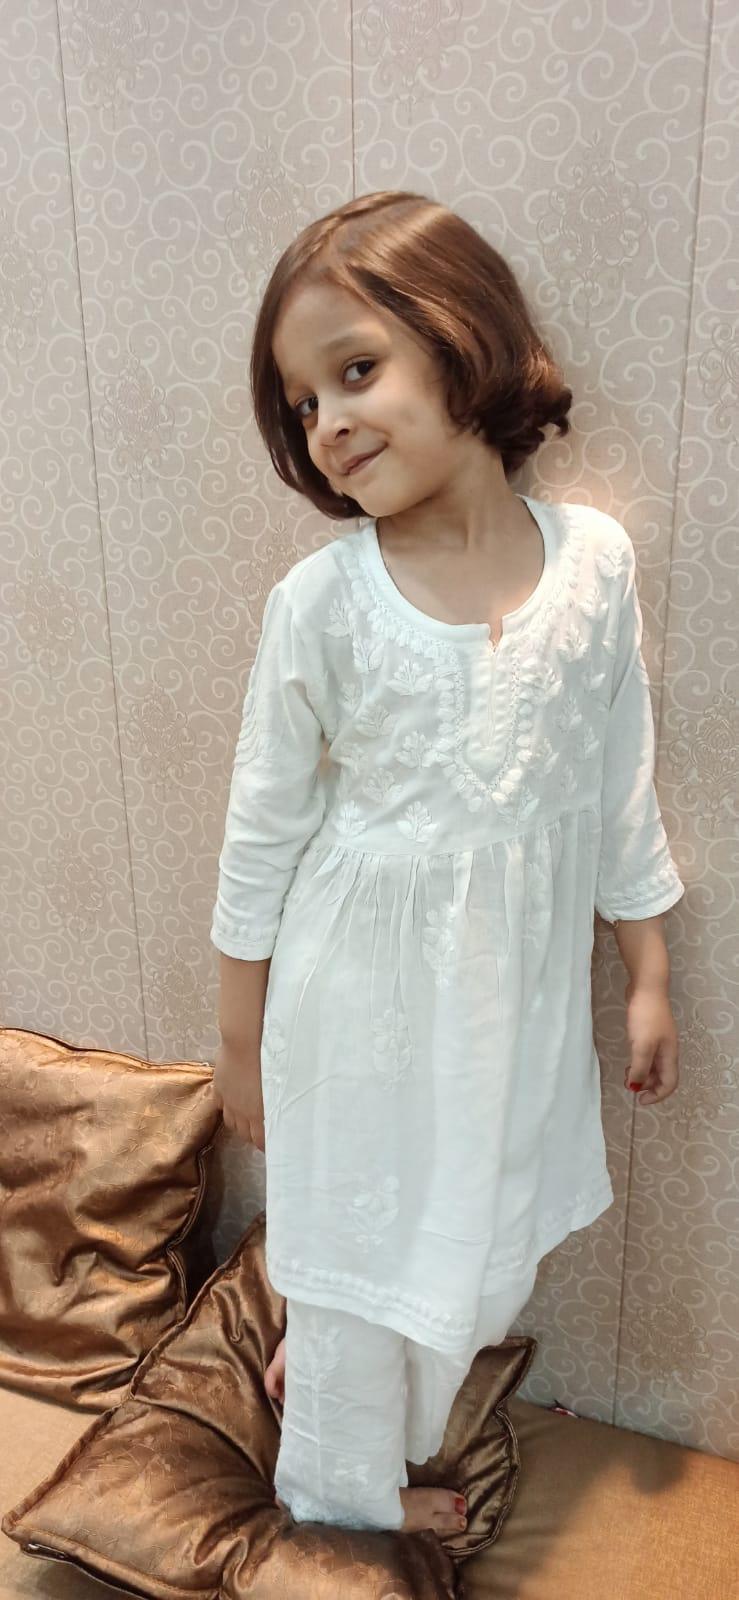 Pure White Lucknow Chikankari Delight Kids Wear Sets - Inayakhan Shop 